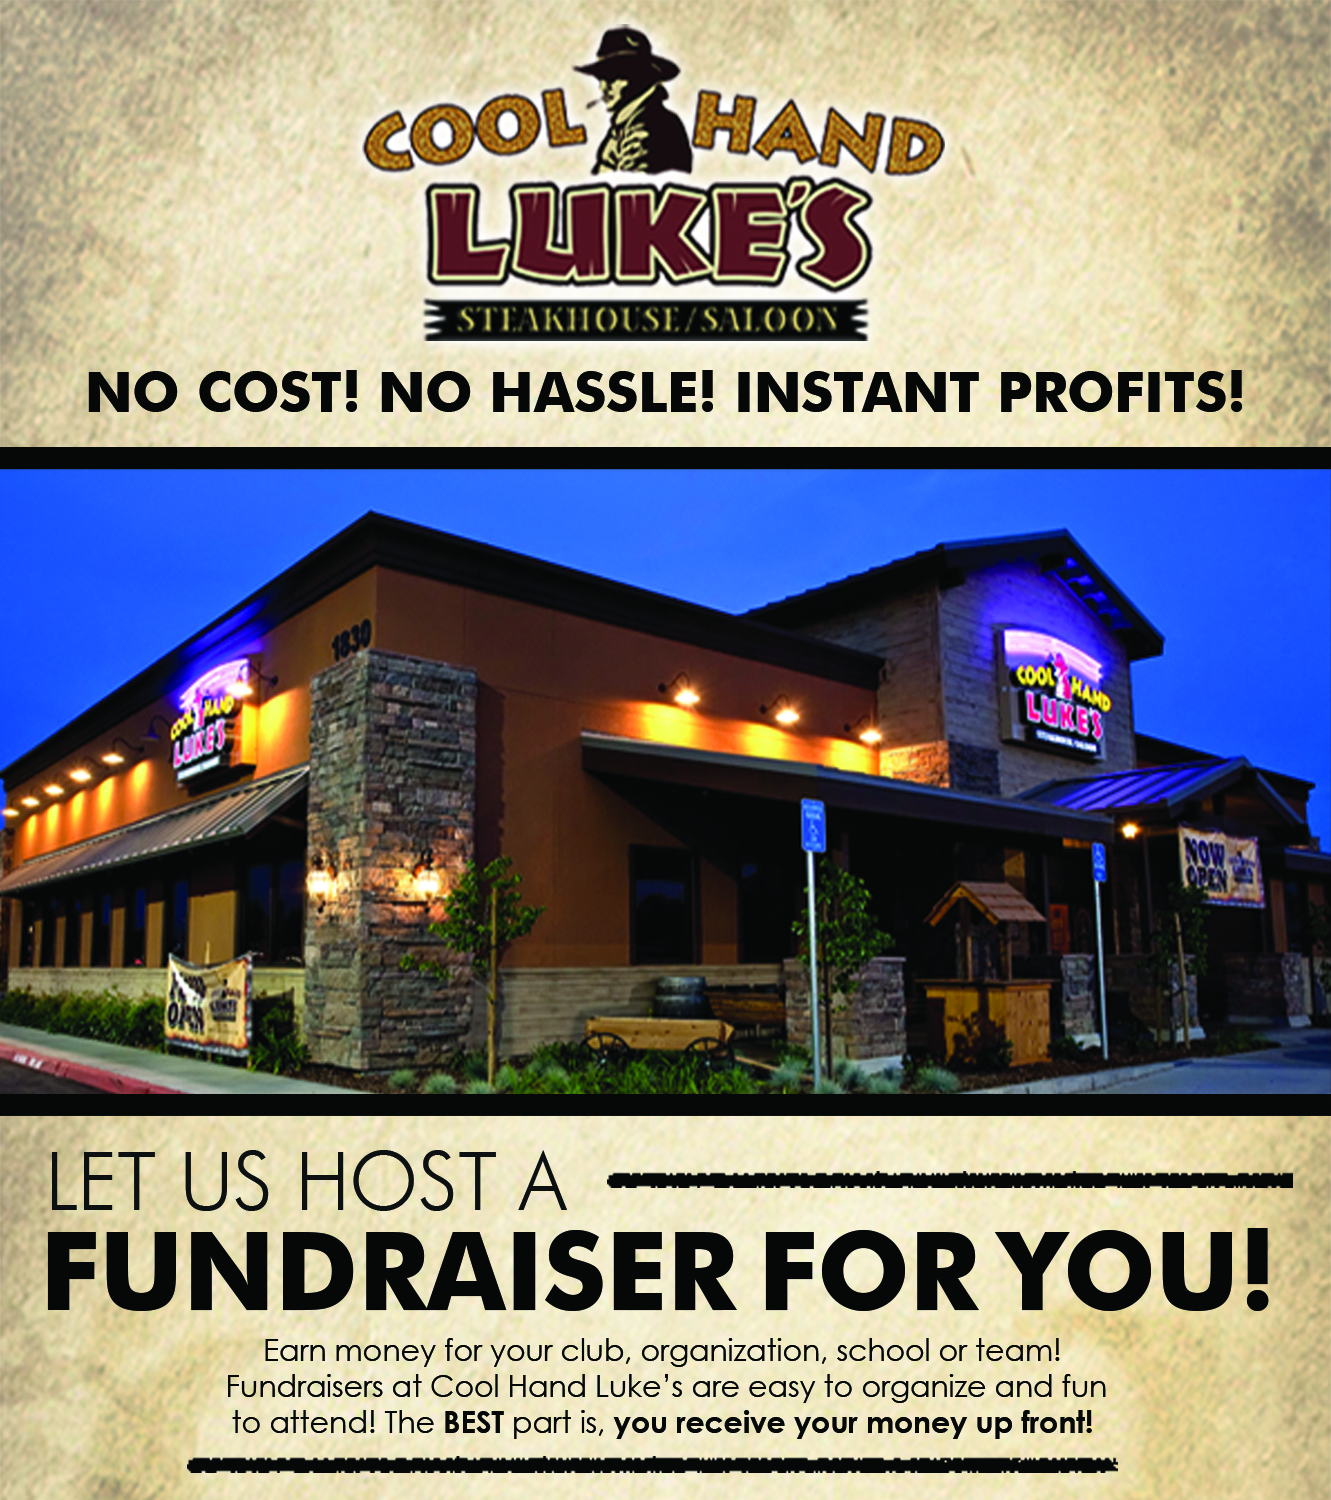 A Cool Hand Luke's branded image that promotes hosting fundraisers for you